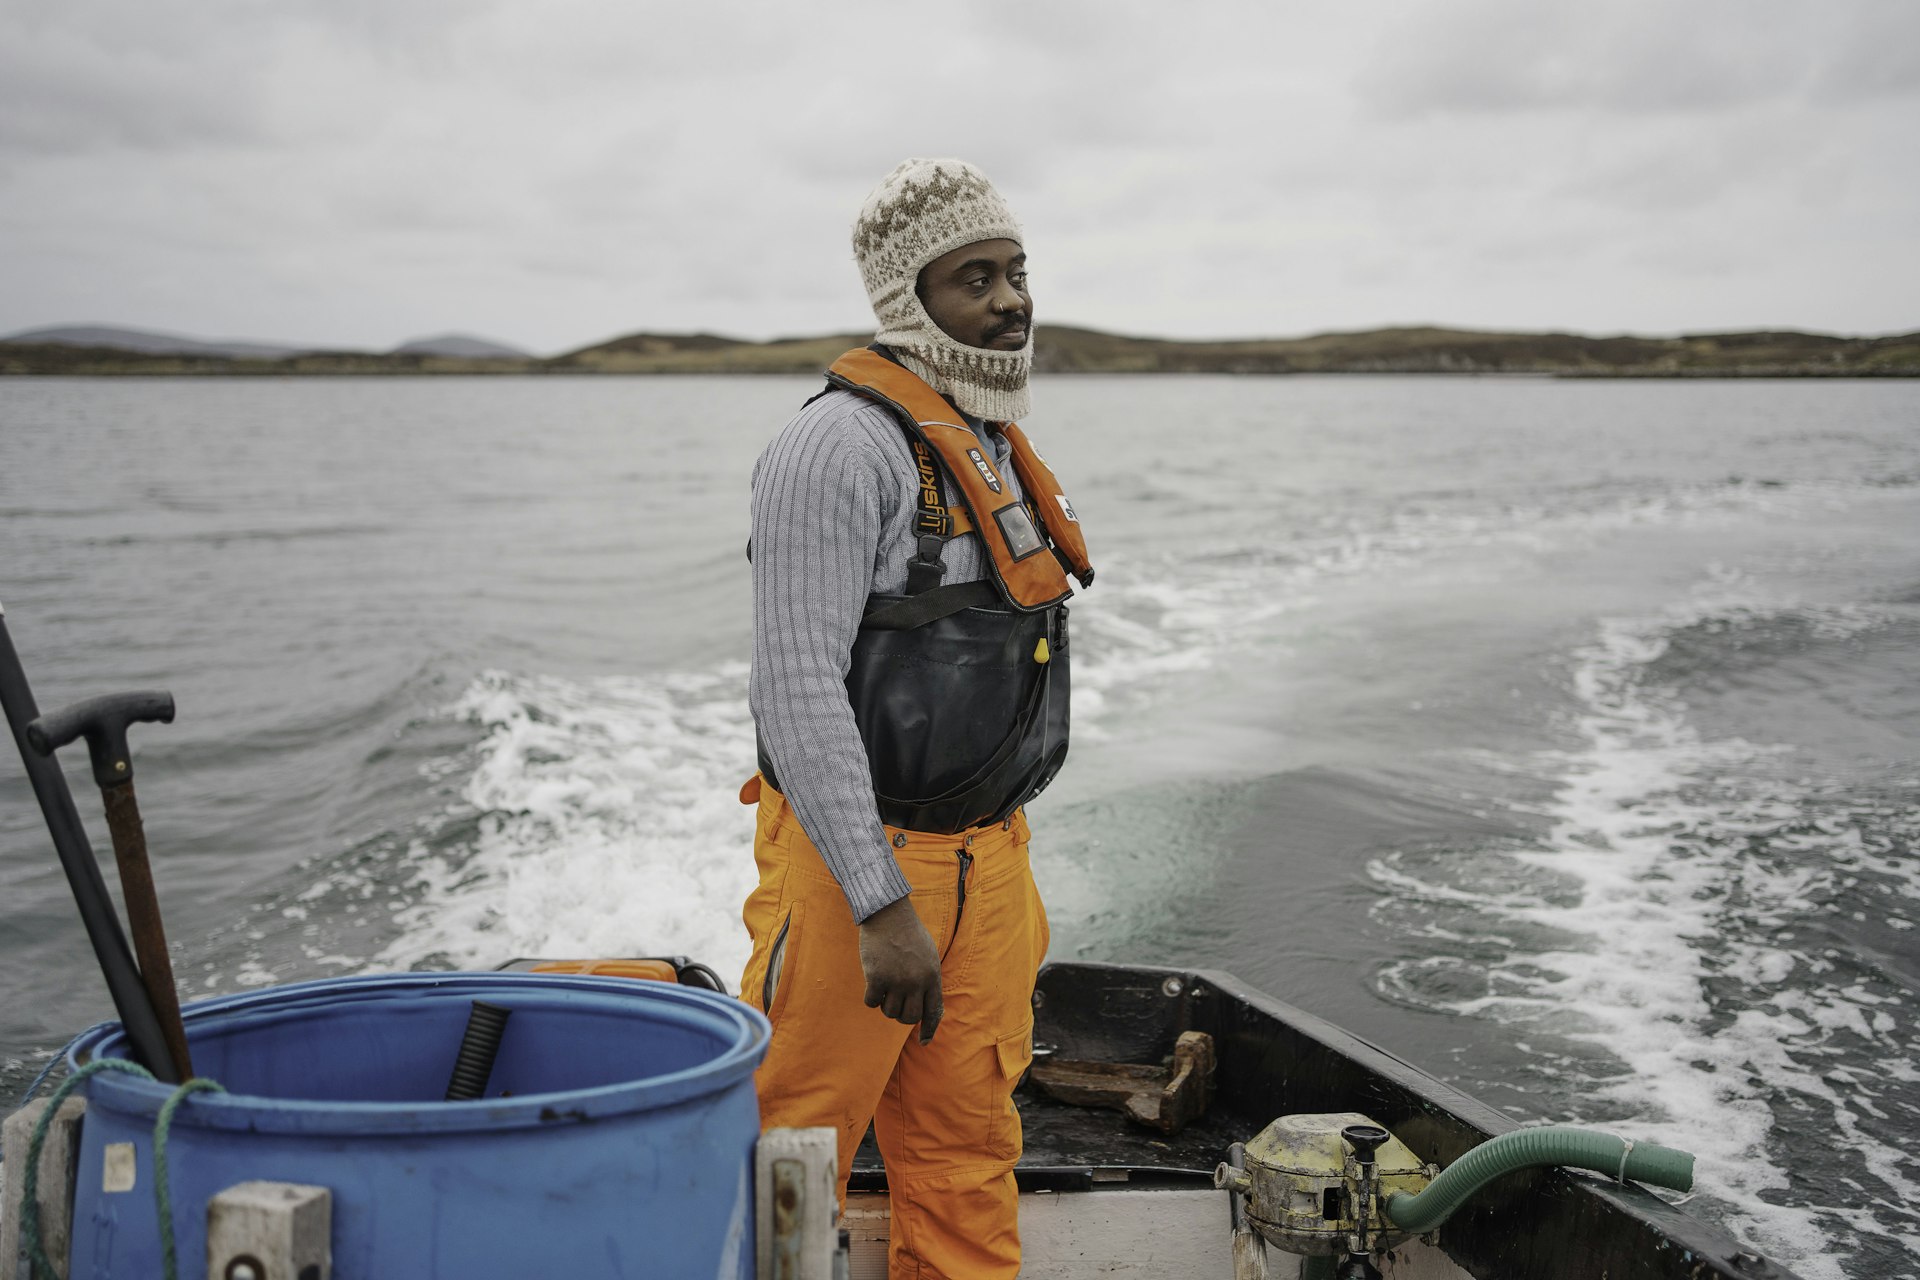 The Black seaweed farmer growing a new life on the Scottish Isles